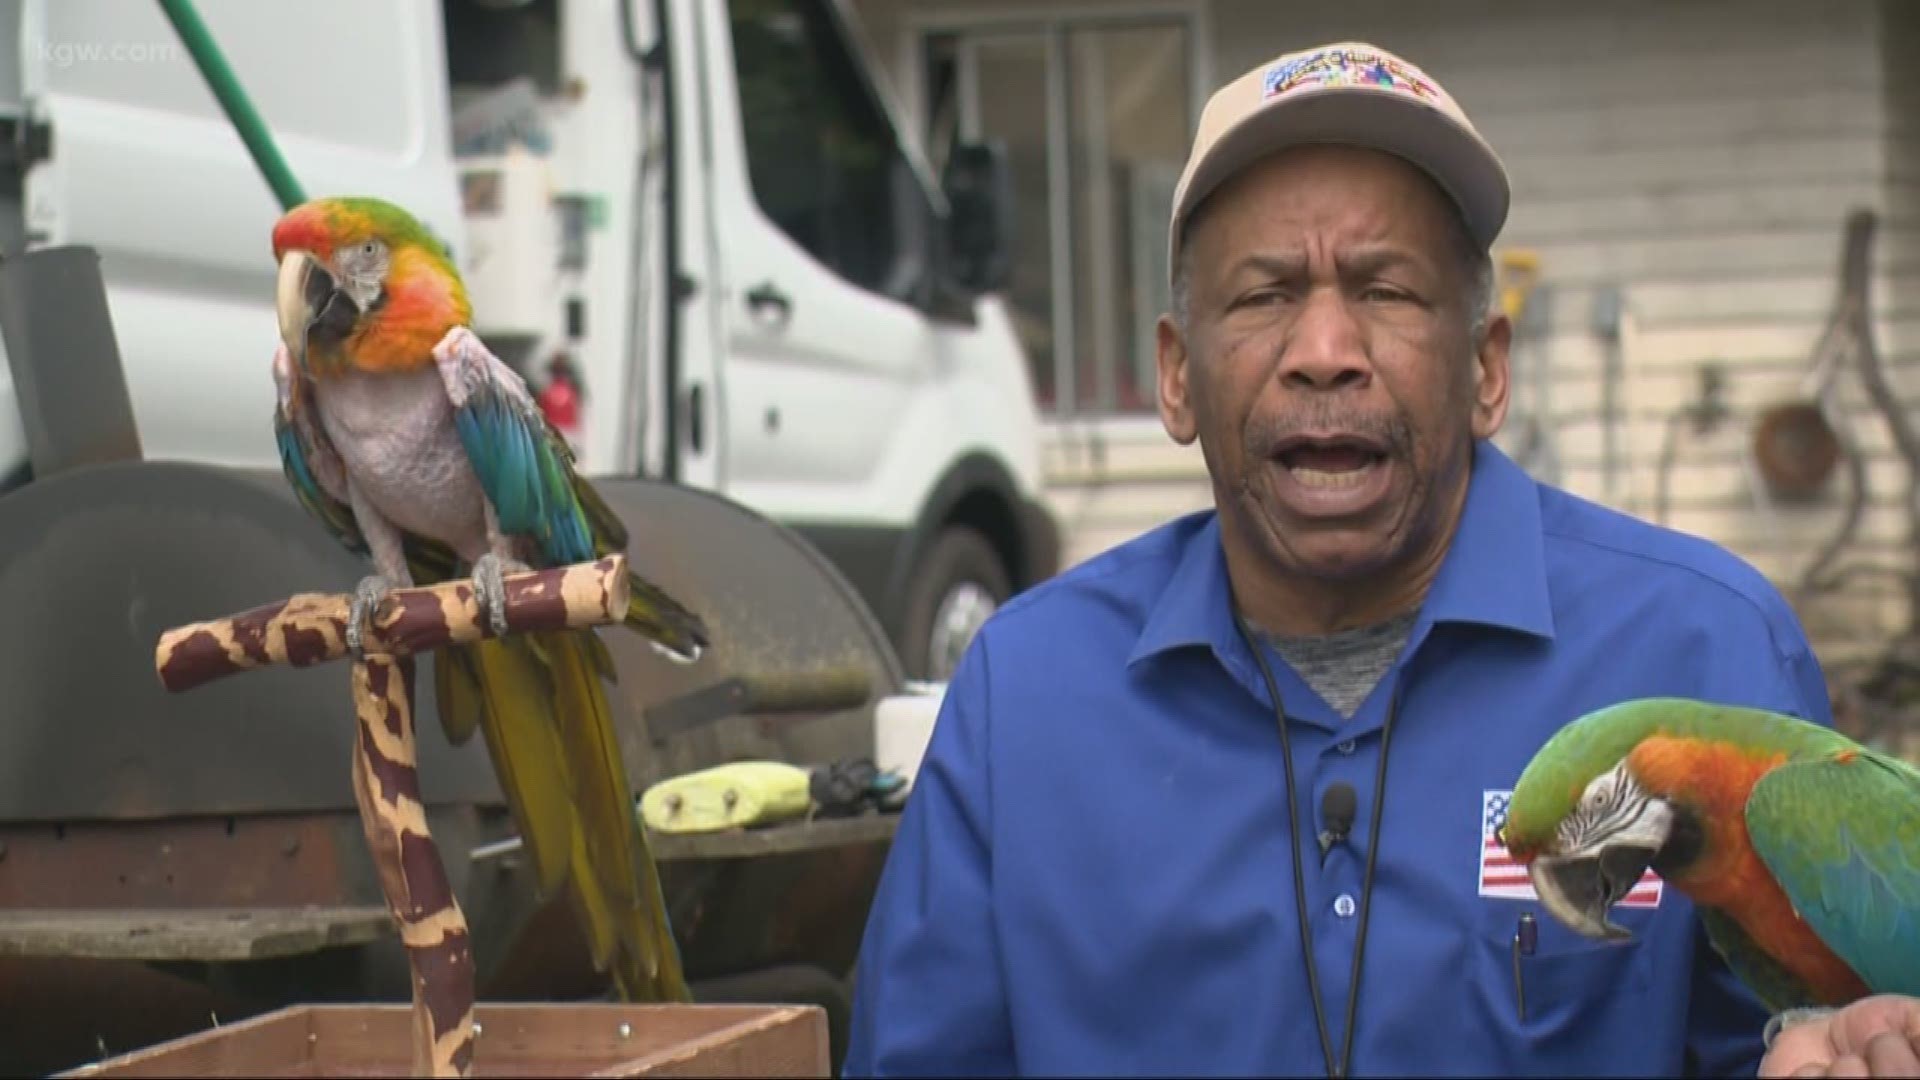 A Washington veteran is helping other vets by adopting out birds.